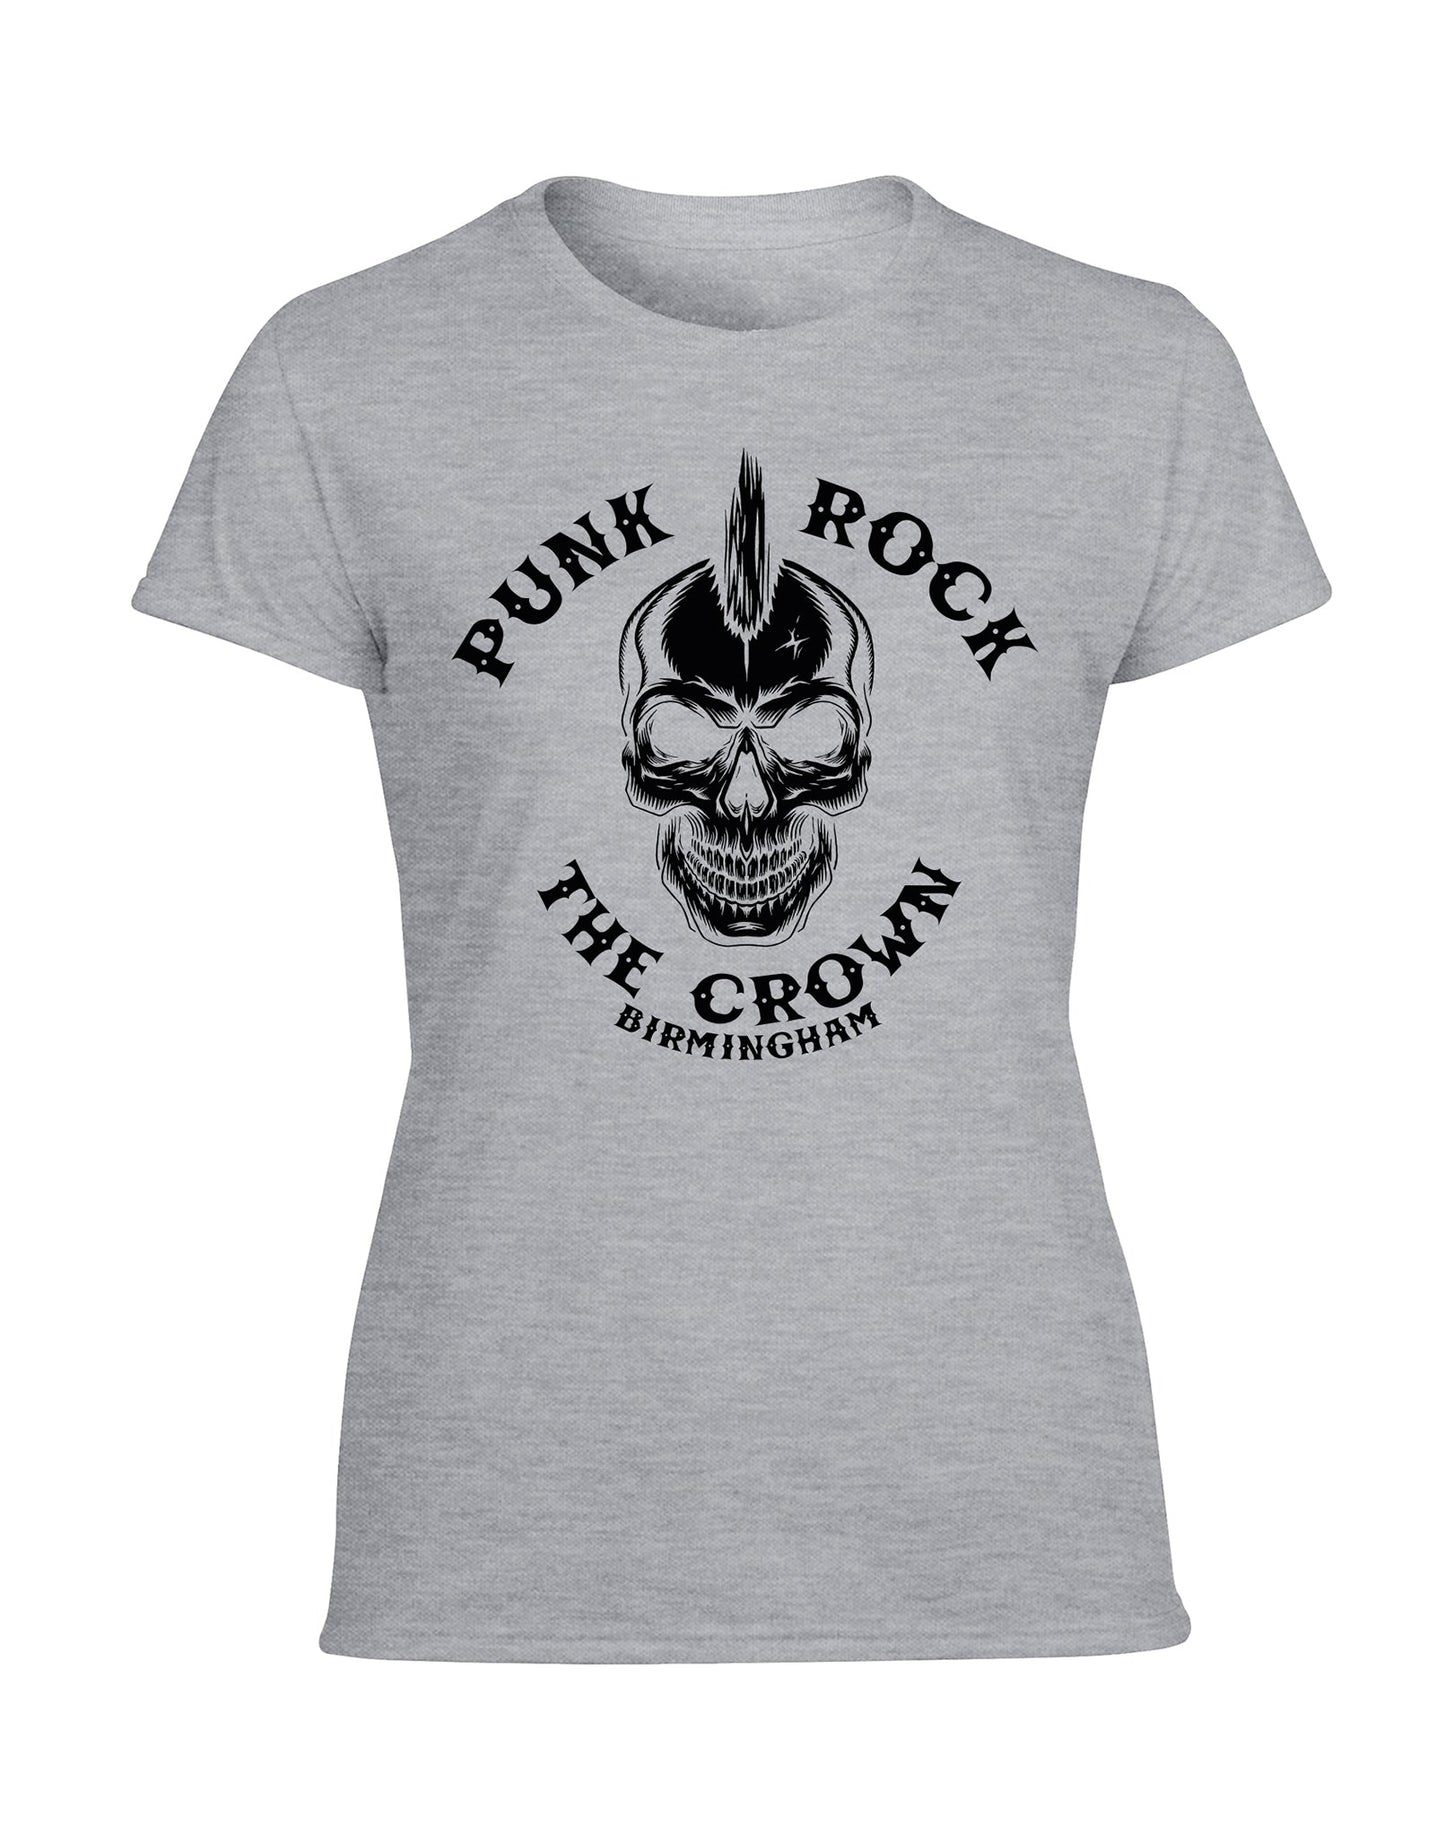 The Crown - punk rock - ladies fit T-shirt - various colours - Dirty Stop Outs